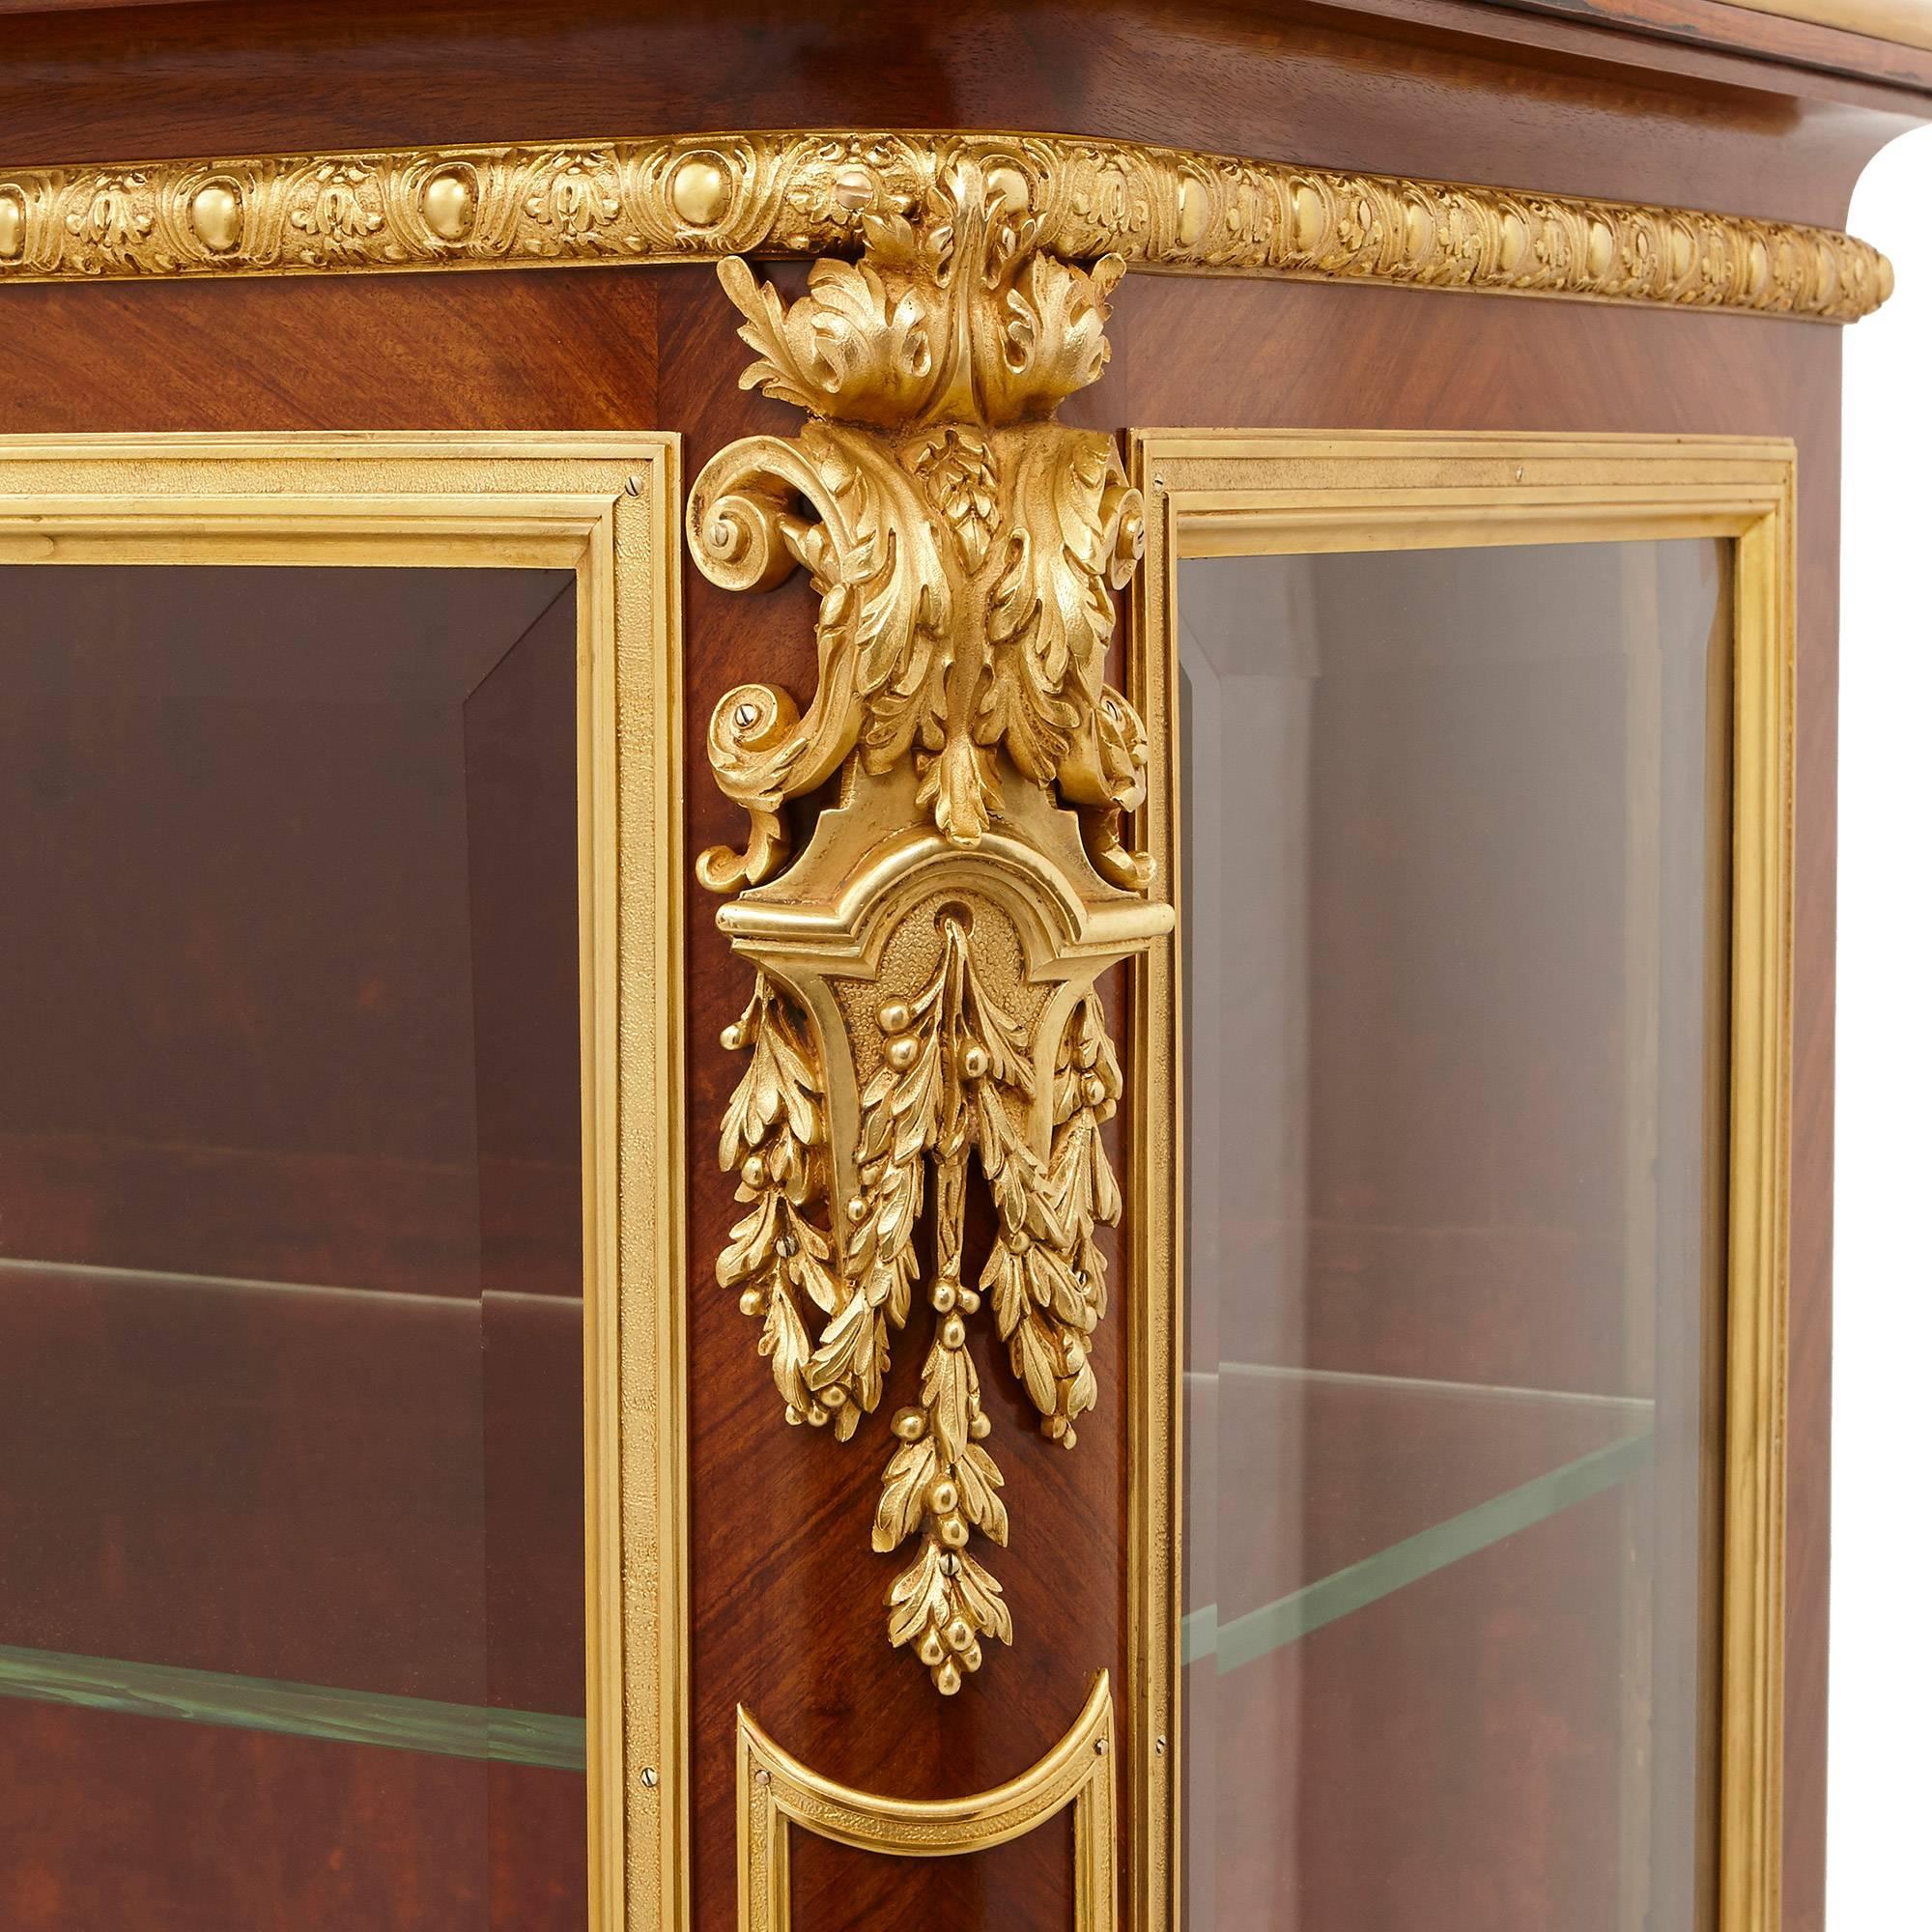 19th Century French Ormolu-Mounted Mahogany, Kingwood, Marquetry and Parquetry Vitrine